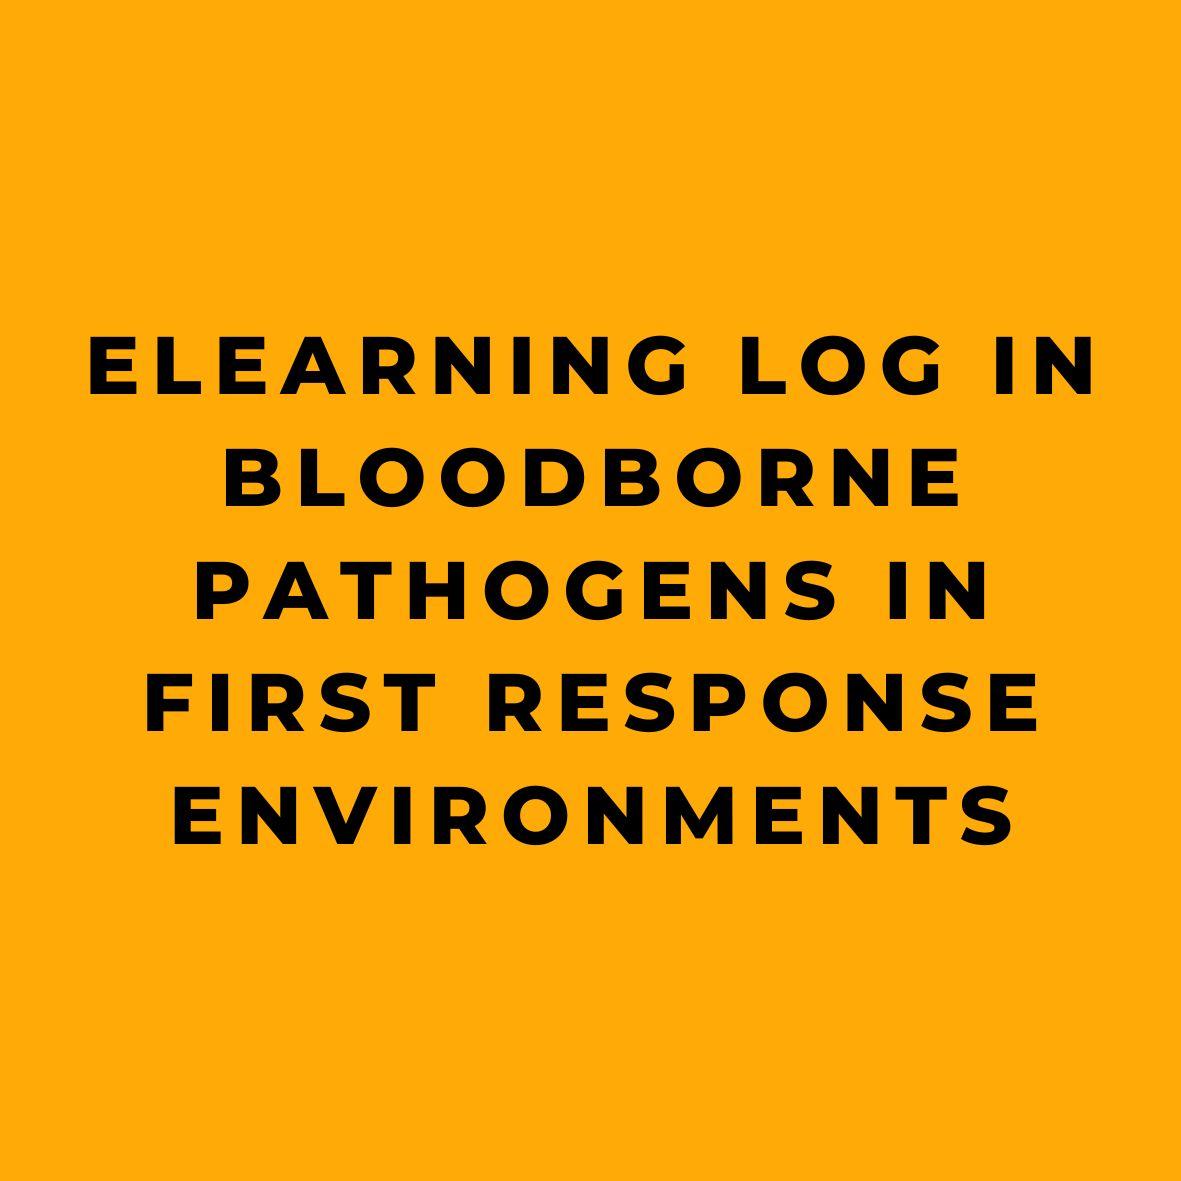 eLearning Log In Bloodborne Pathogens in First Response Environments